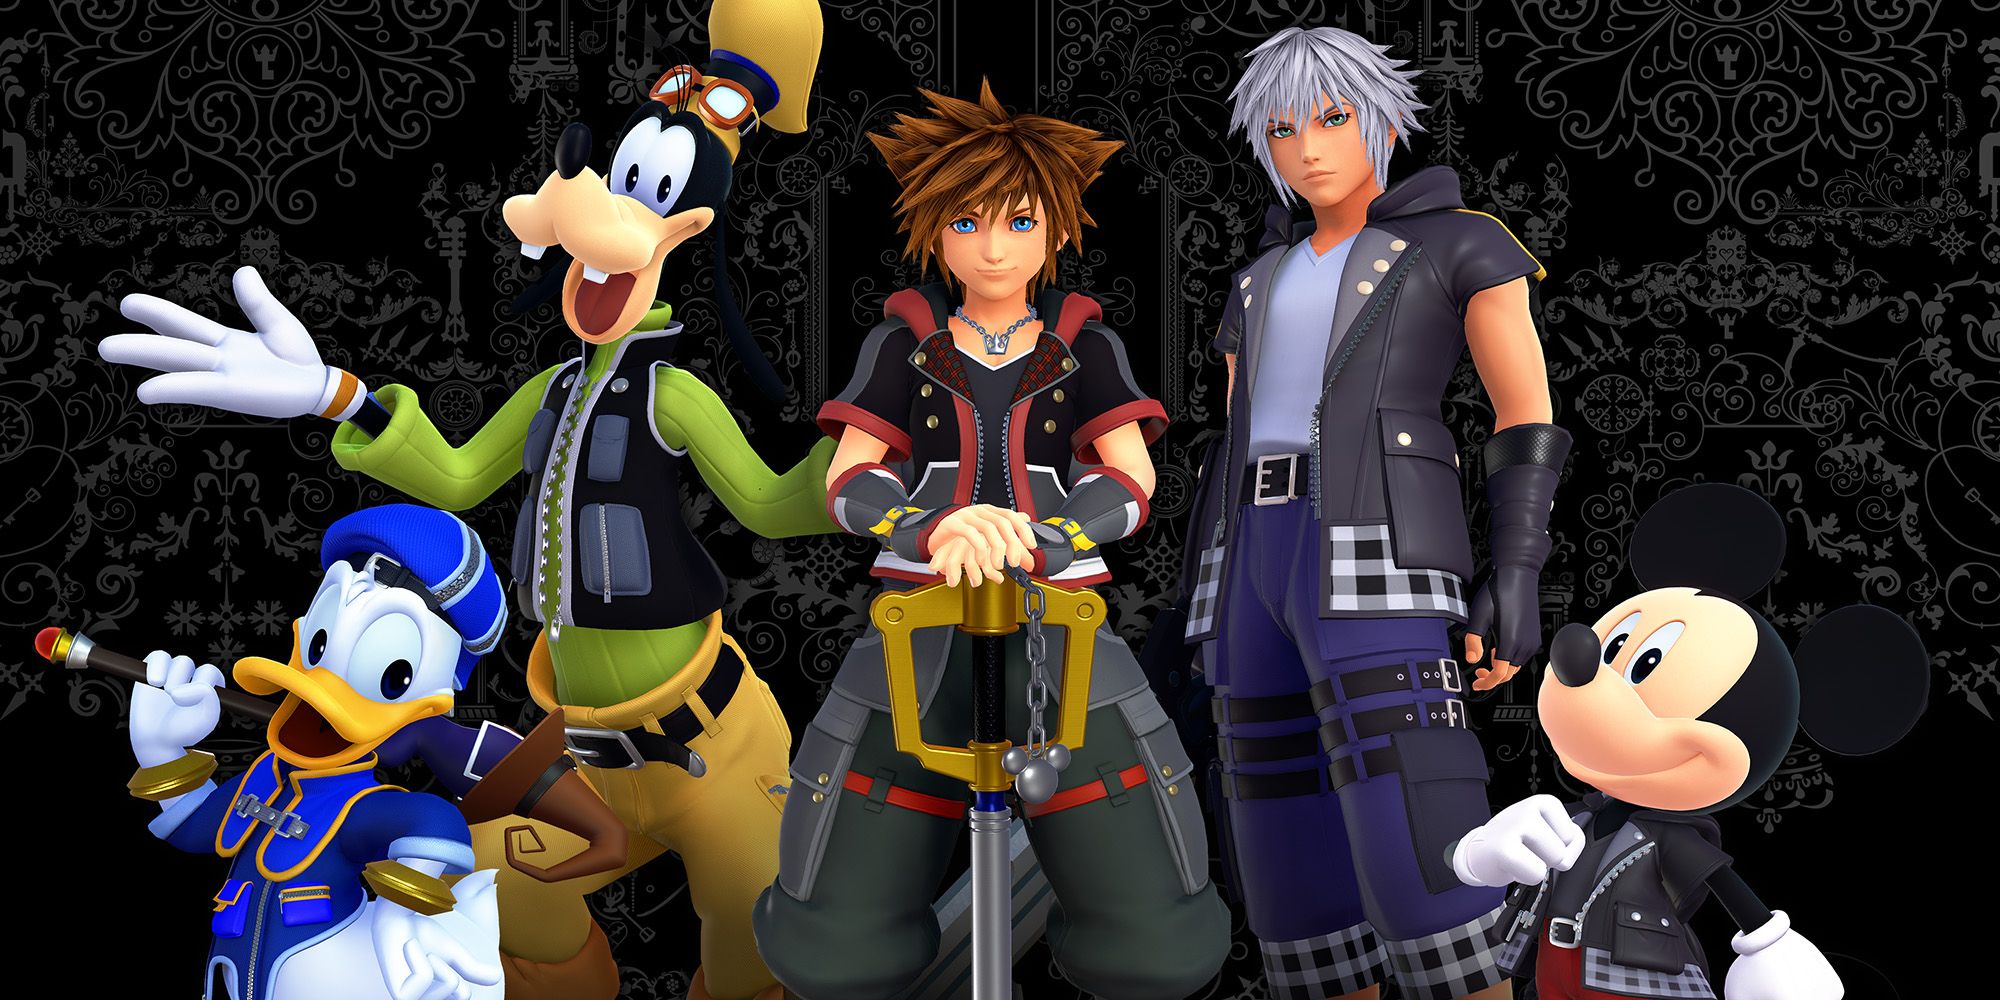 Sora and friends standing to attention in Kingdom Hearts 3